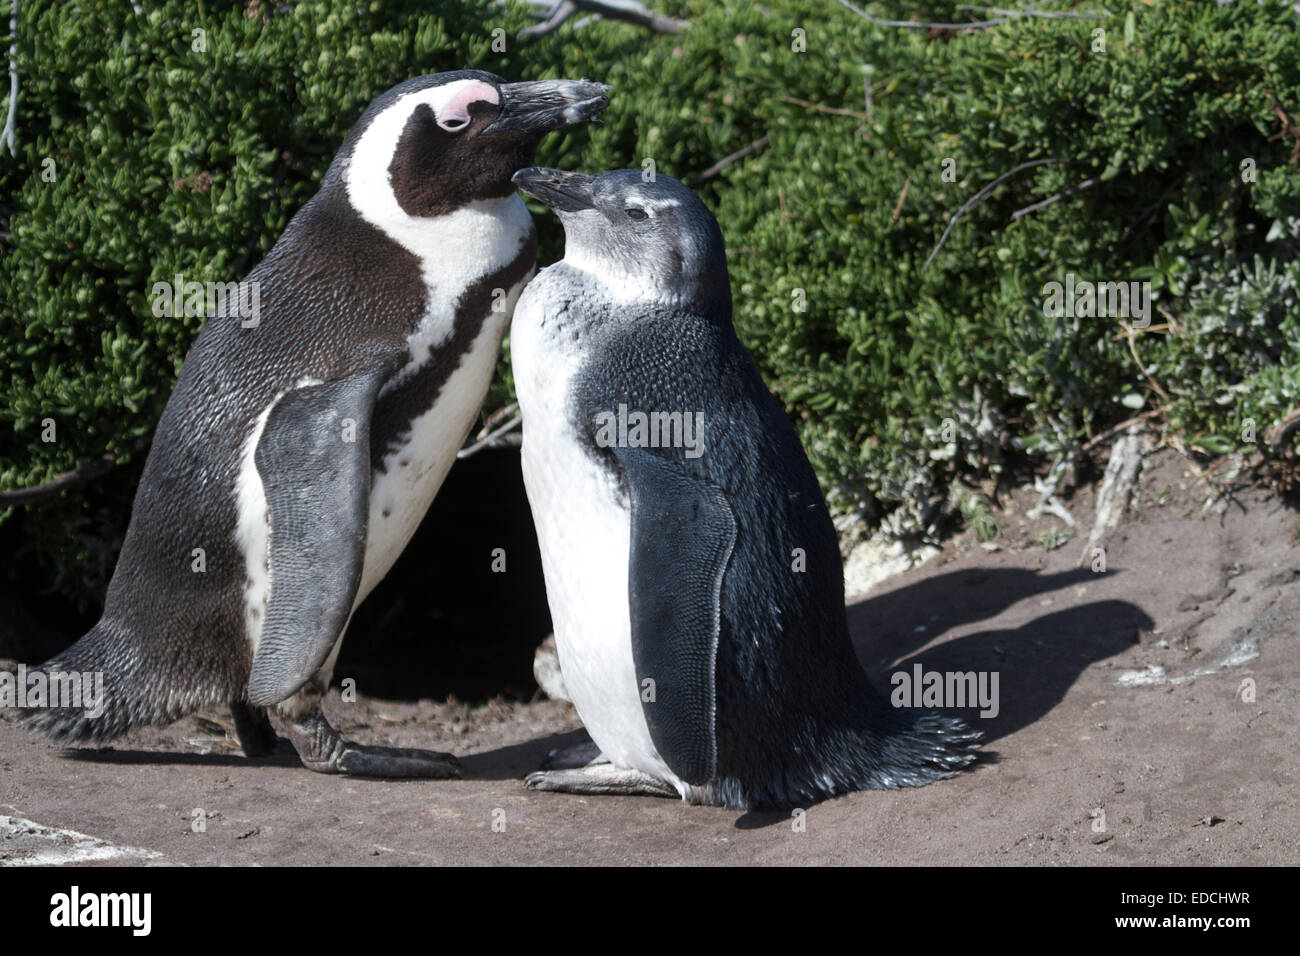 The African penguin (Spheniscus demersus), also known as the jackass penguin and black-footed penguin is a species of penguin. Stock Photo